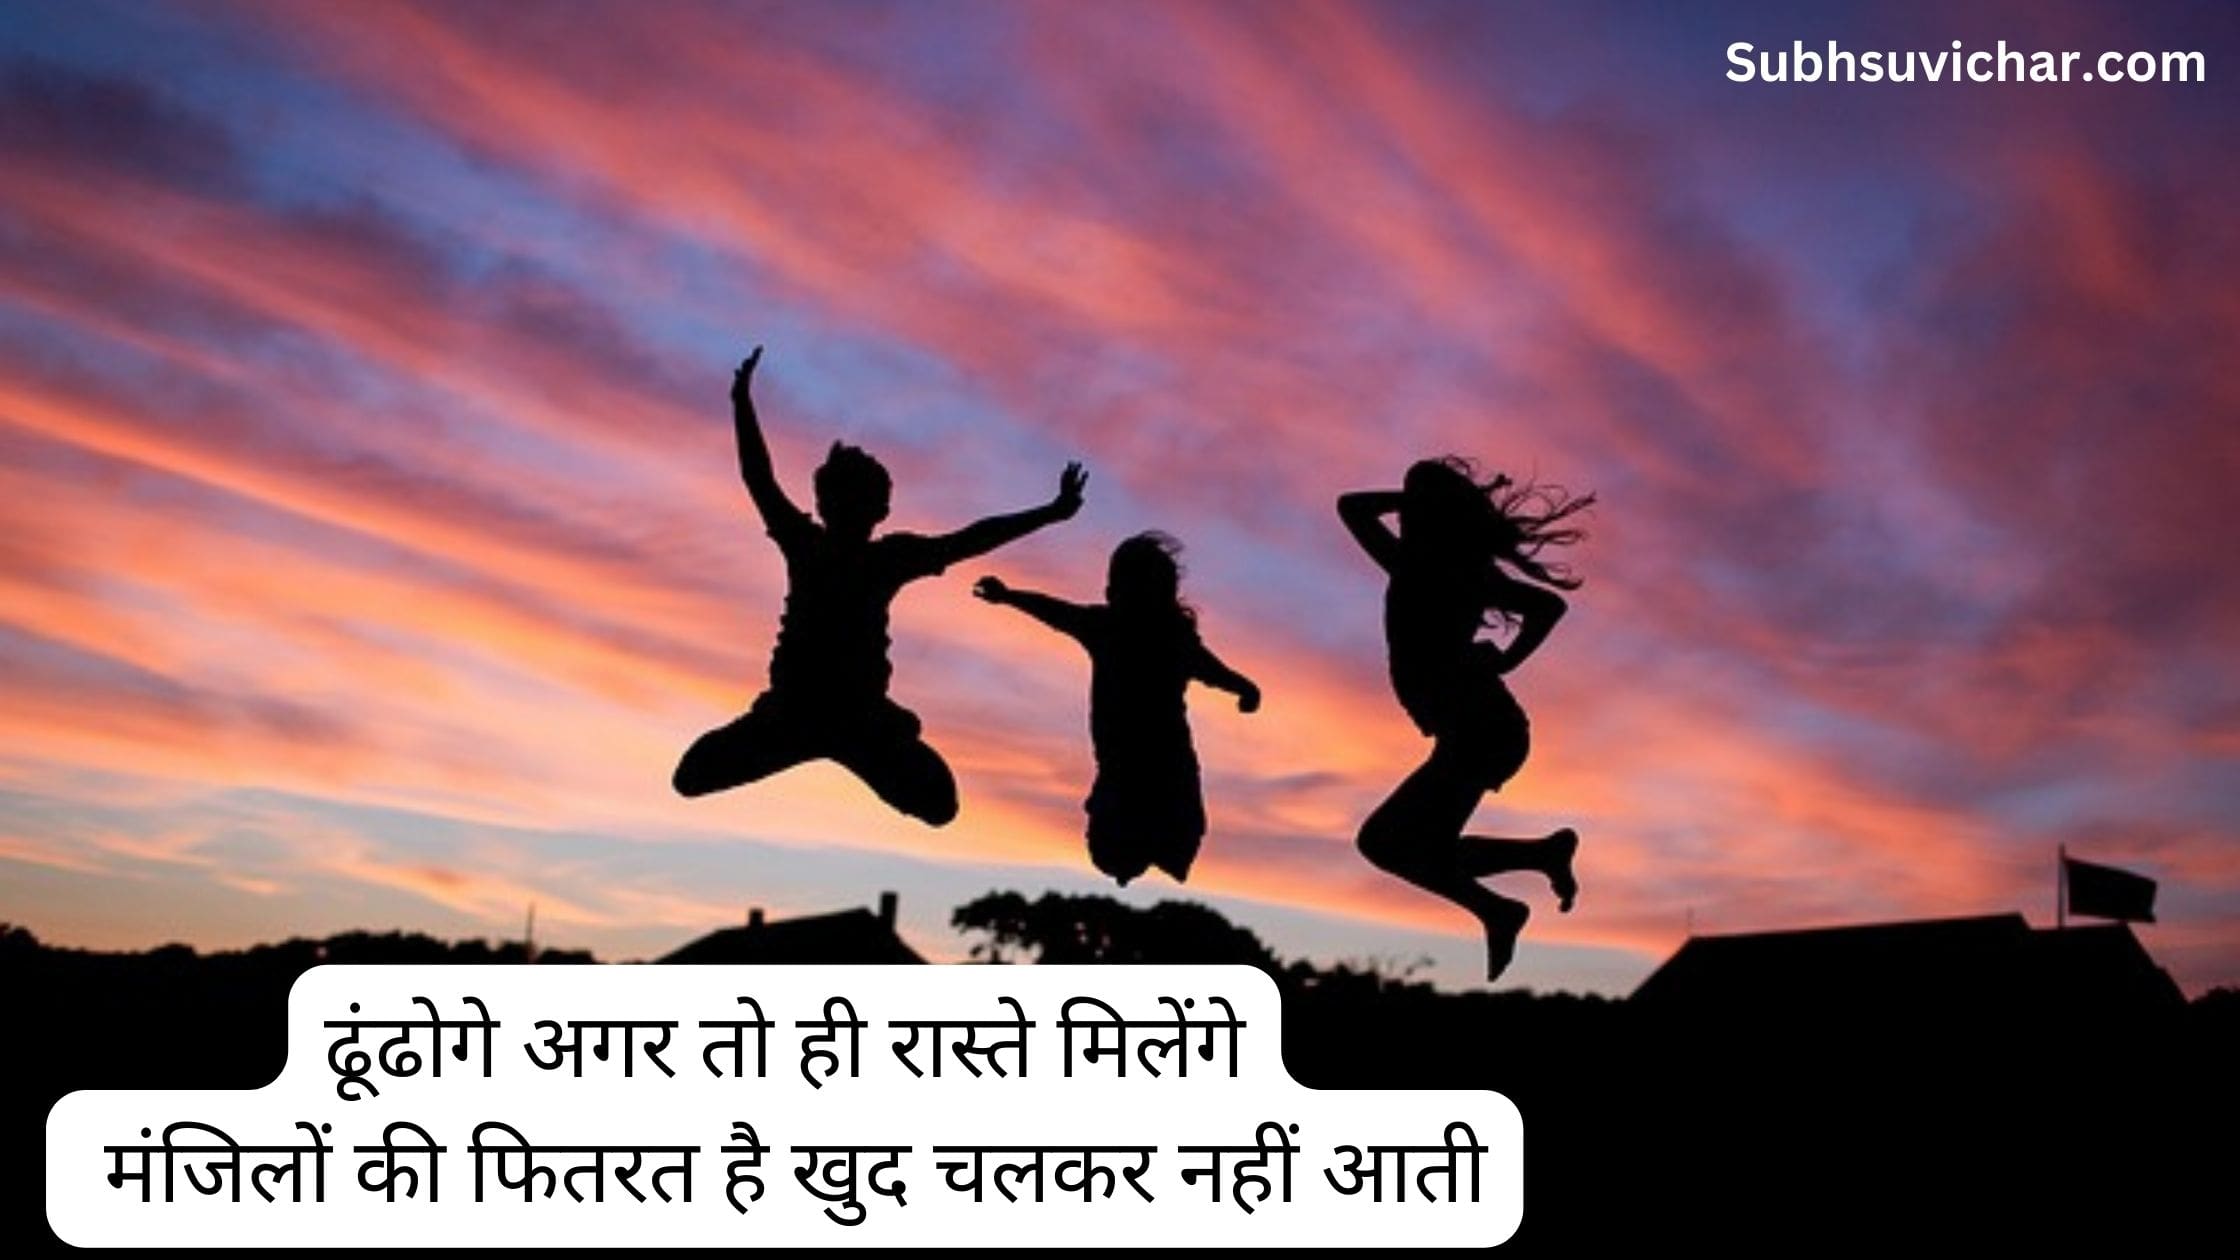 This post contains great collection of suvichar in hindi font with high quality images for your whatsapp and facebook status.